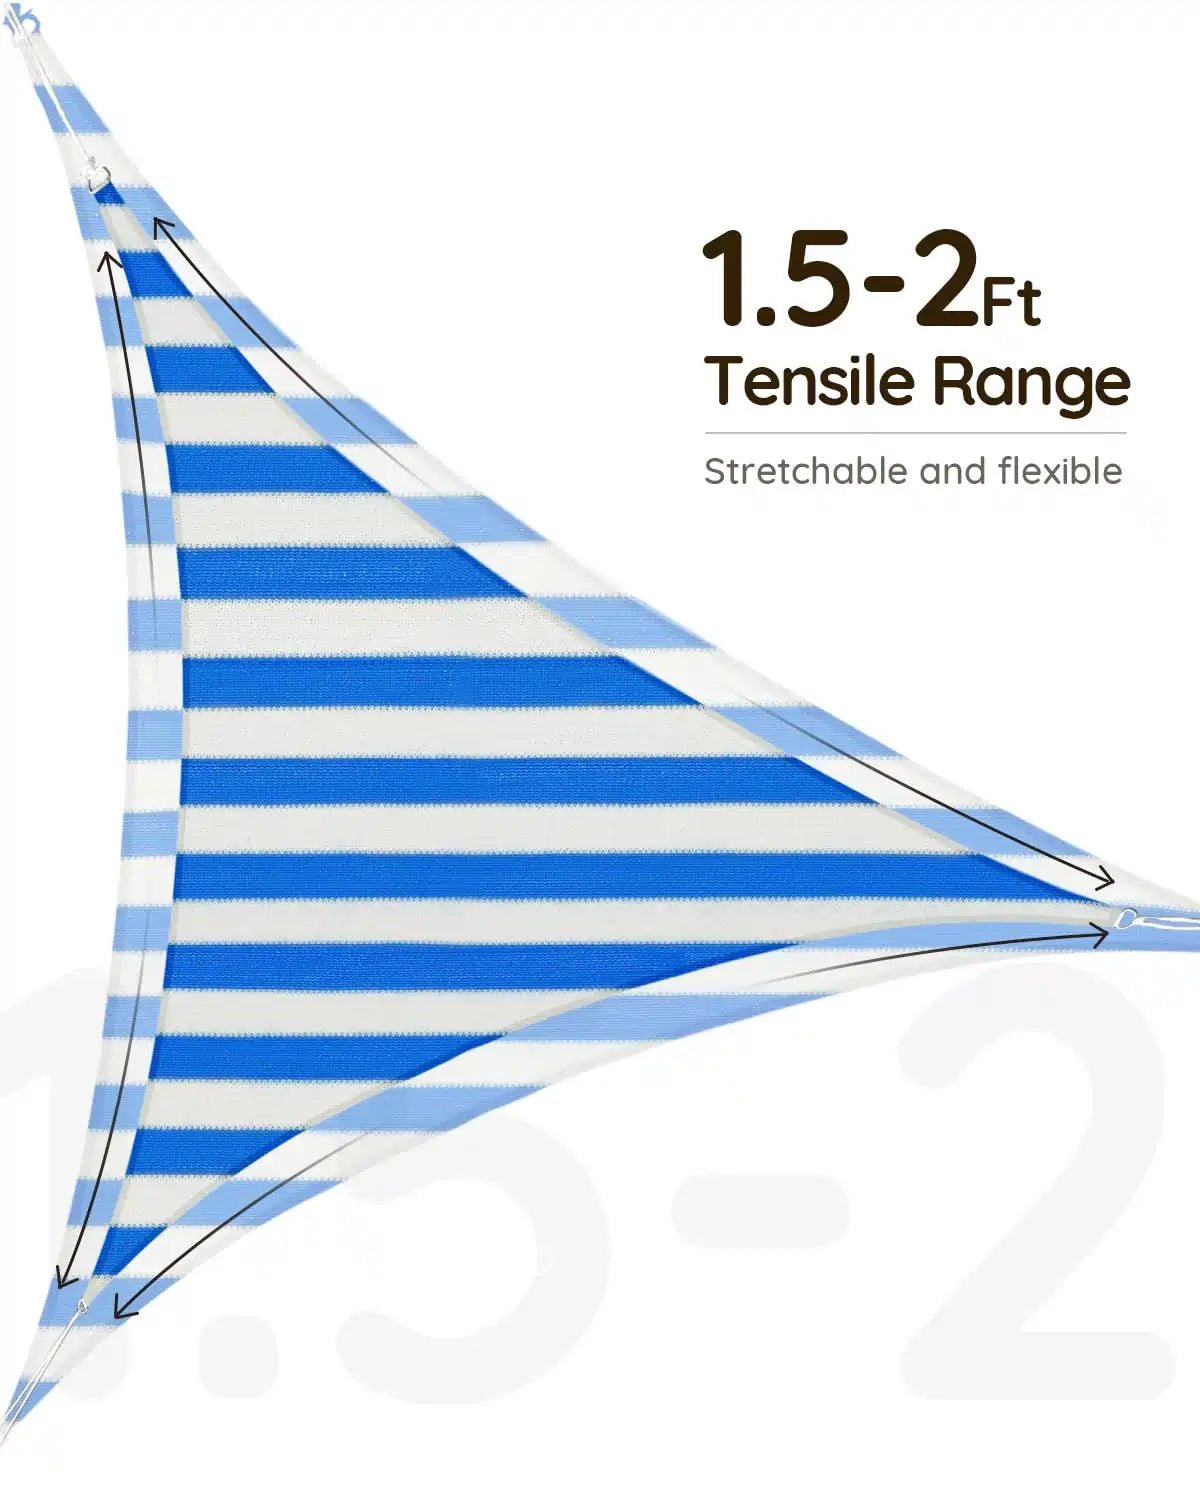 White and Blue shade sail are stretchable